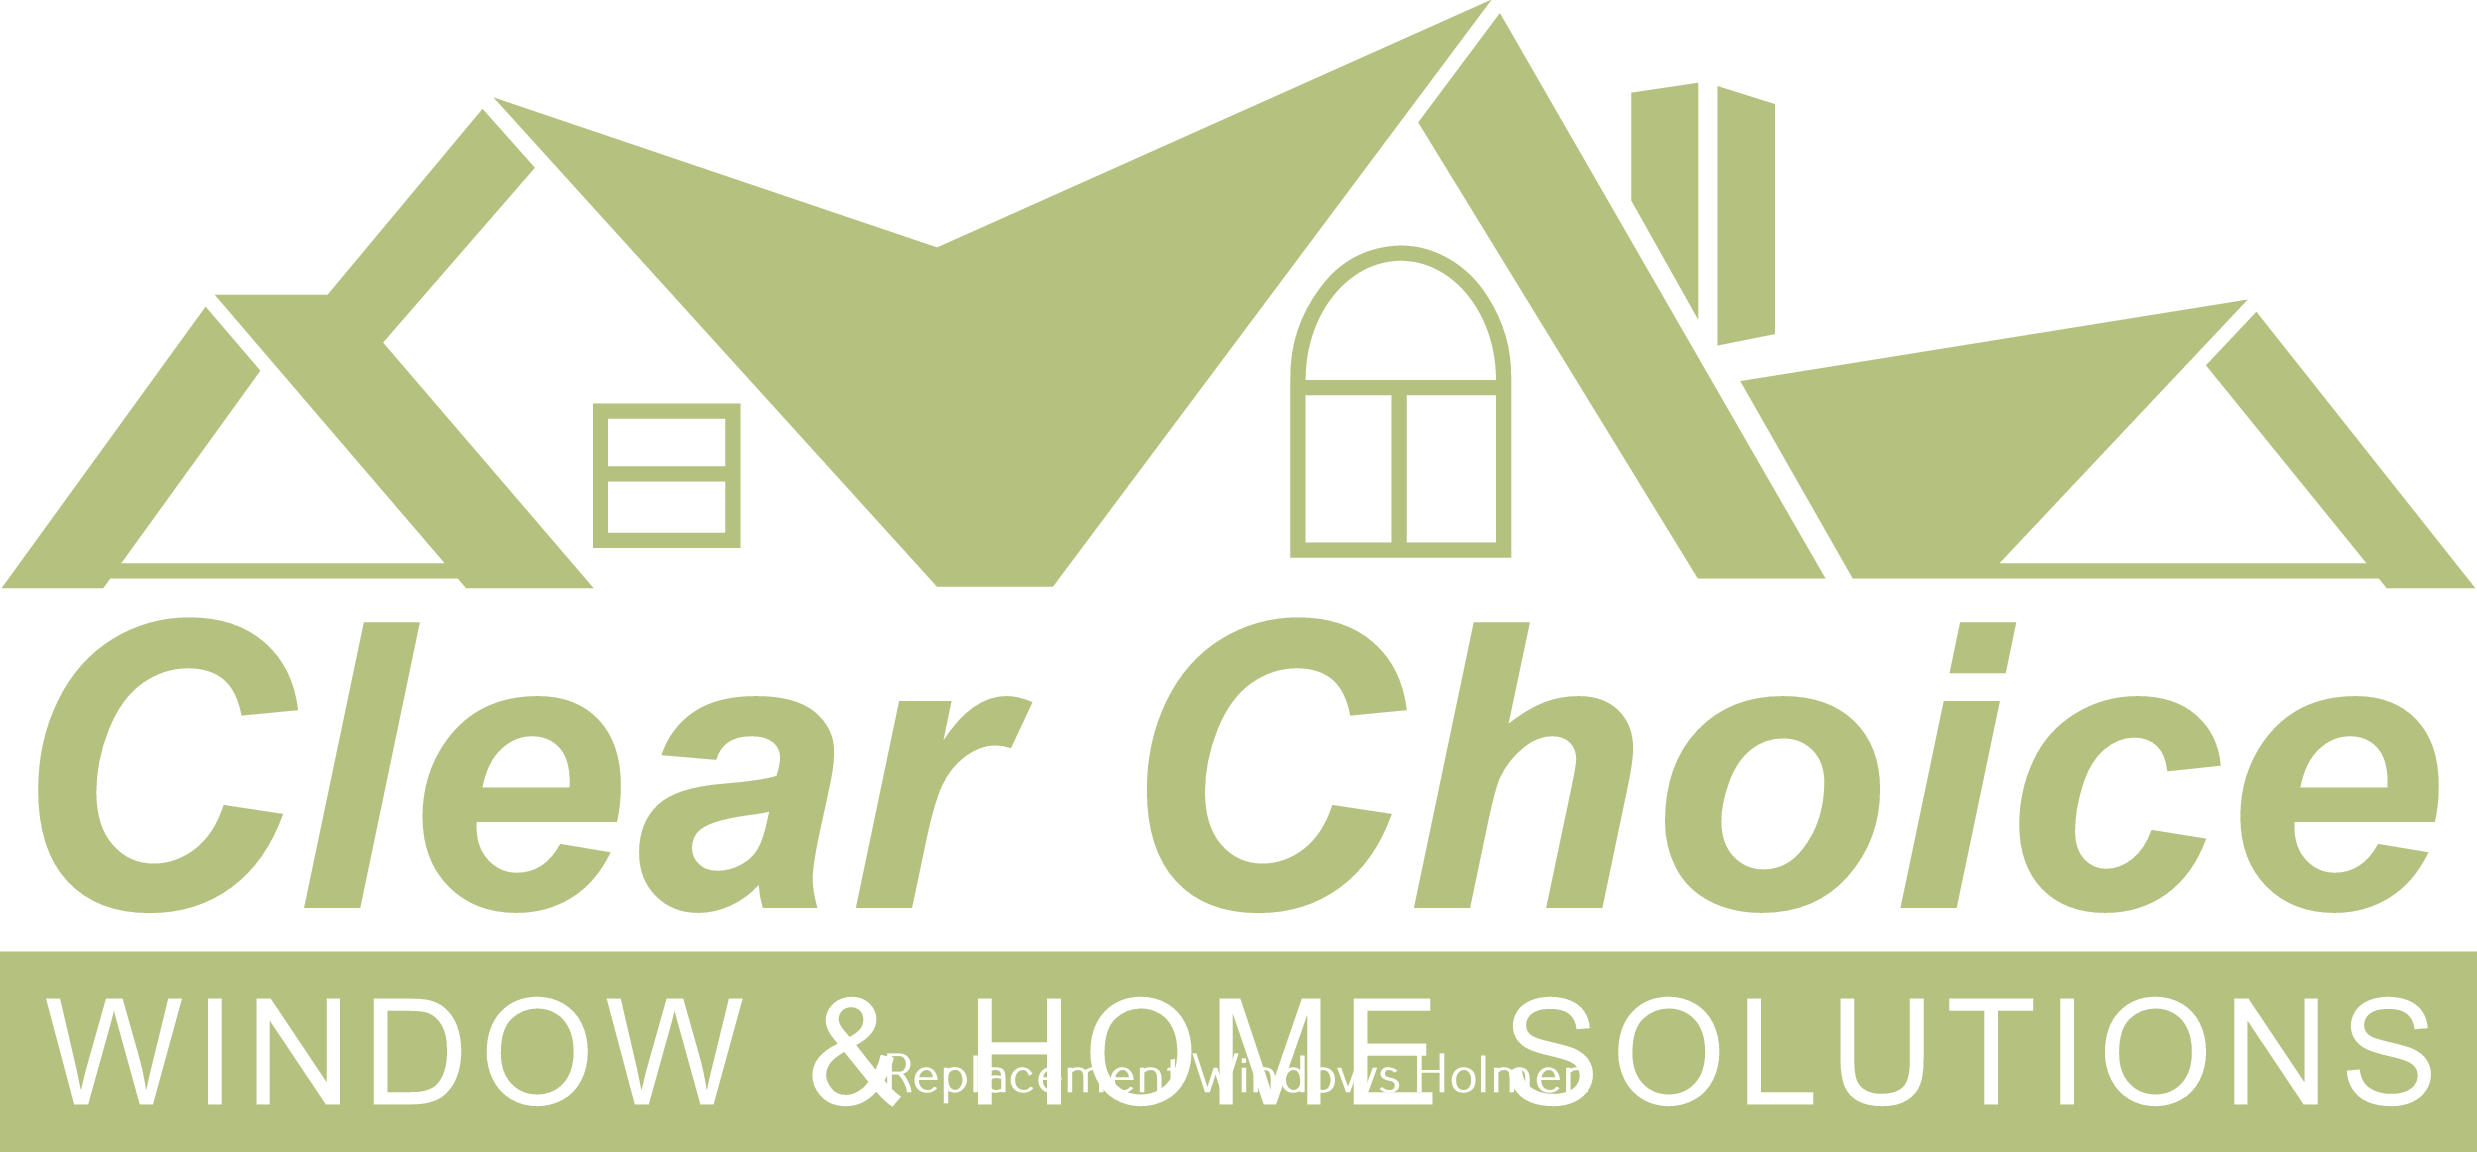 Clear Choice Window & Home Solutions Can Make Home Improvement Dreams Come True